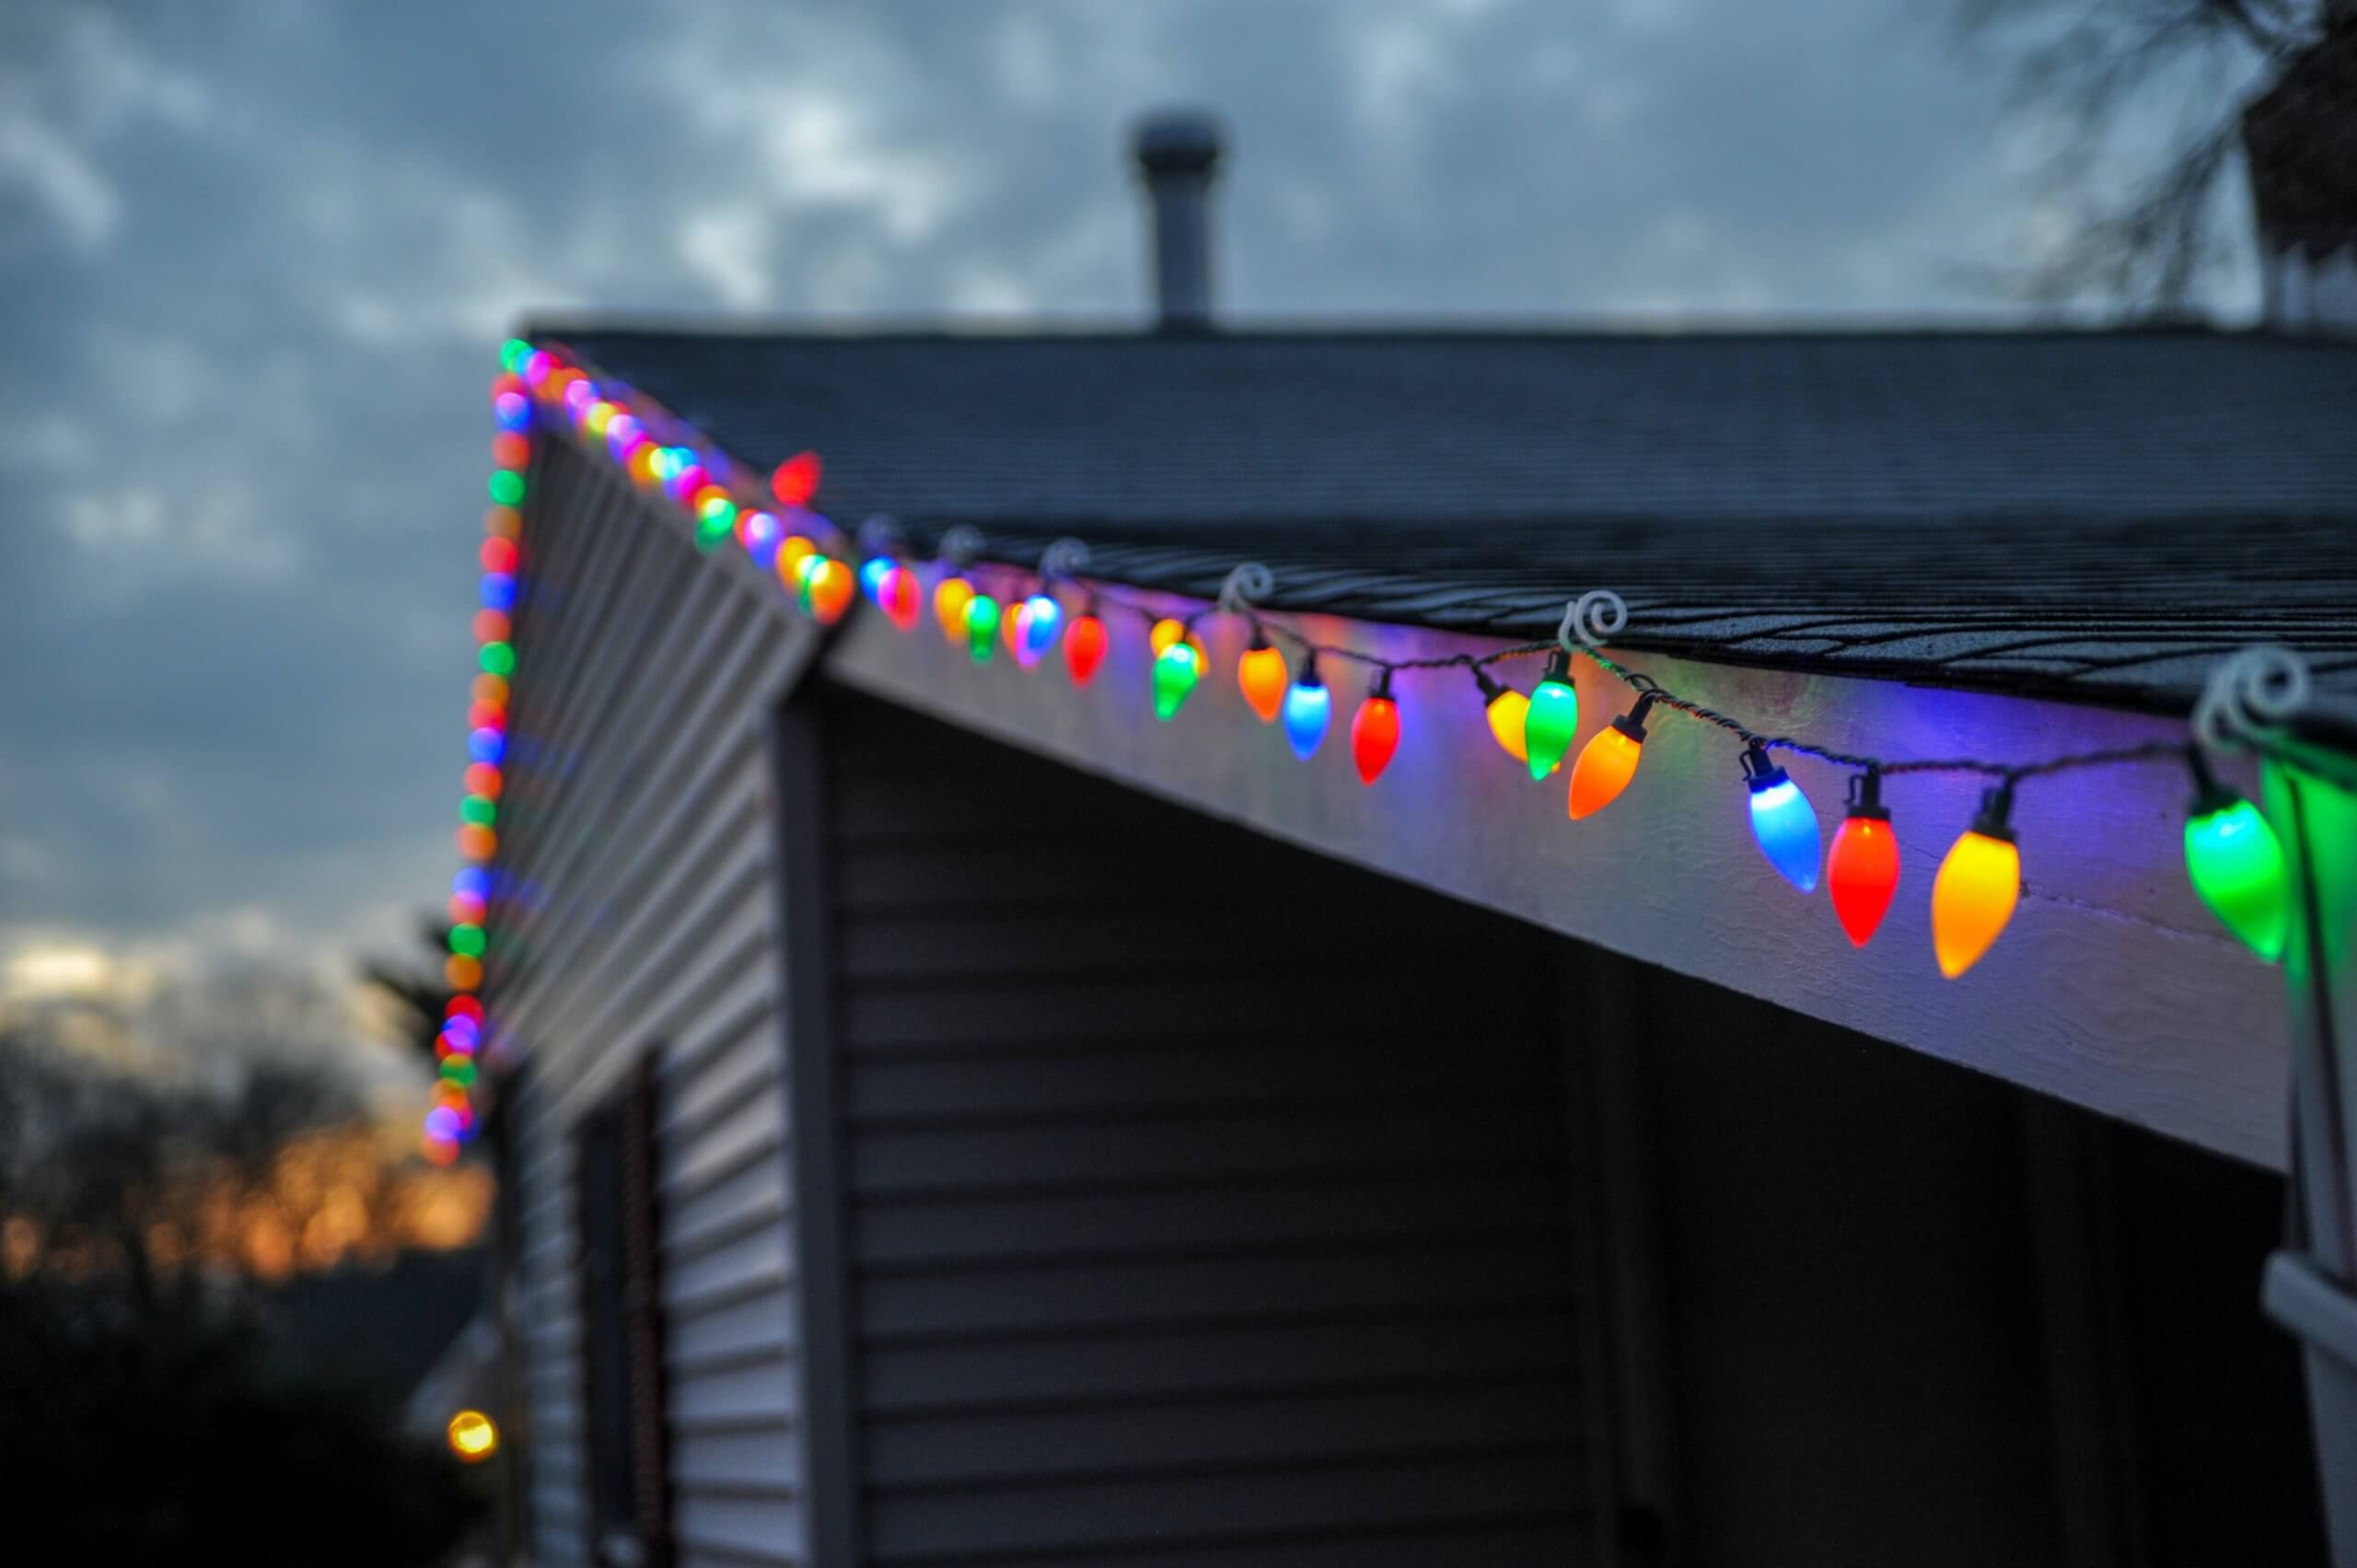 Holiday Home Decorating: Why Roofers Make the Best Decorators